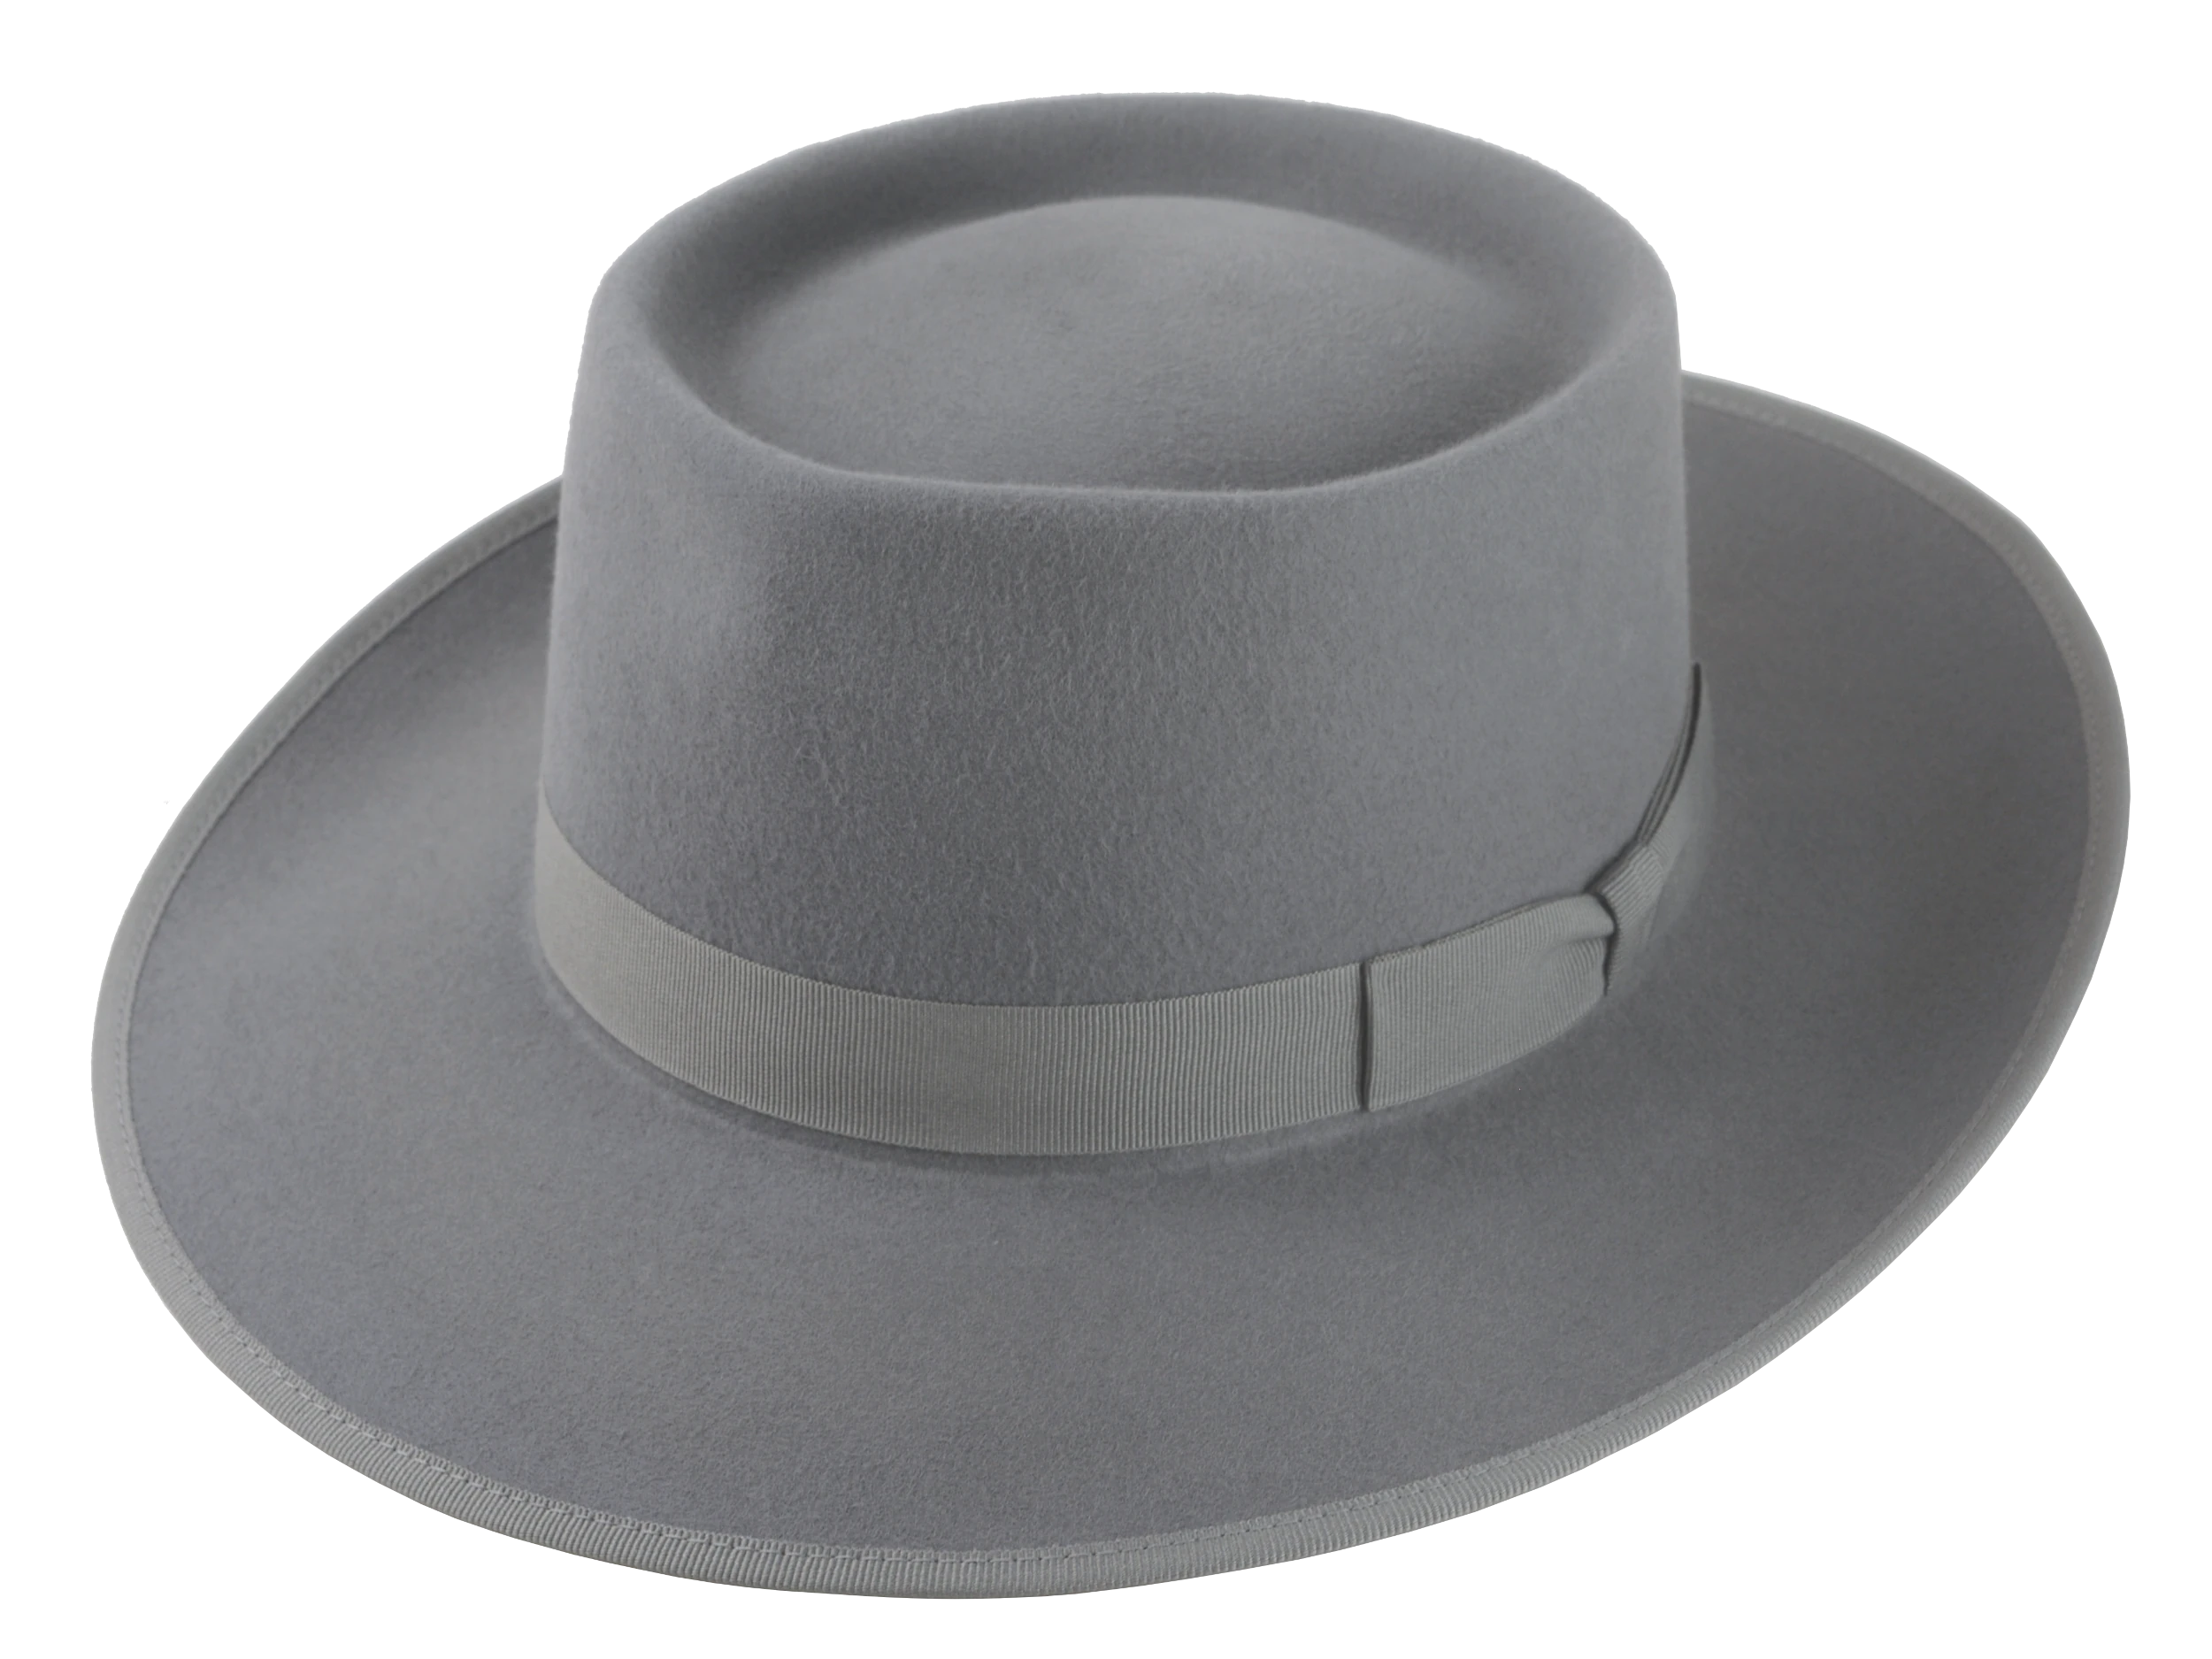 The Oppenheimer Wide-Brim Porkpie Hat in Pewter Grey, accentuating its fashionable shade | Agnoulita Hats